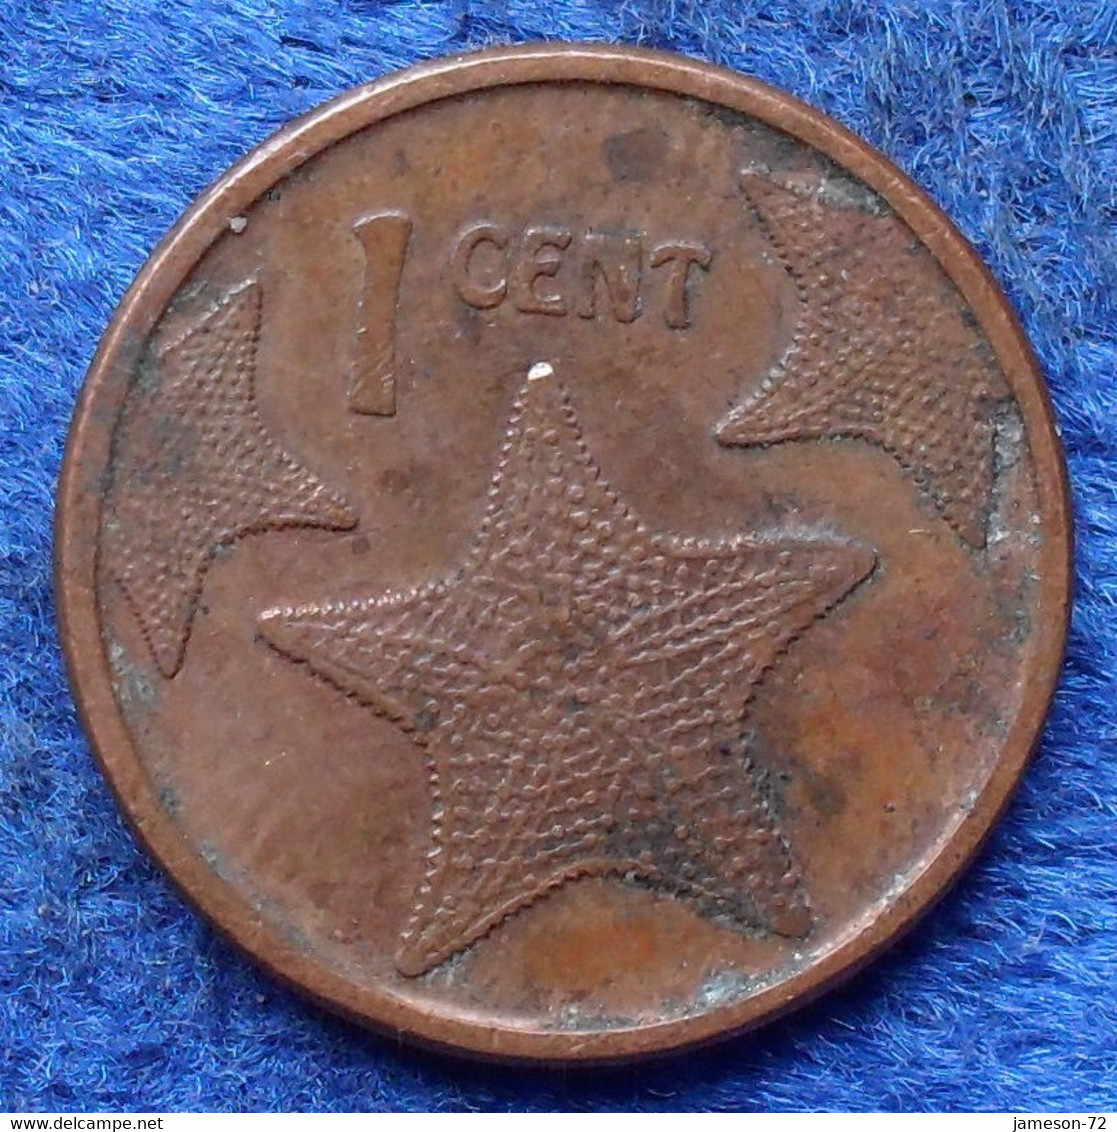 BAHAMAS - 1 Cent 2009 KM#218.2 Independent Since 1973 America - Edelweiss Coins - Bahamas